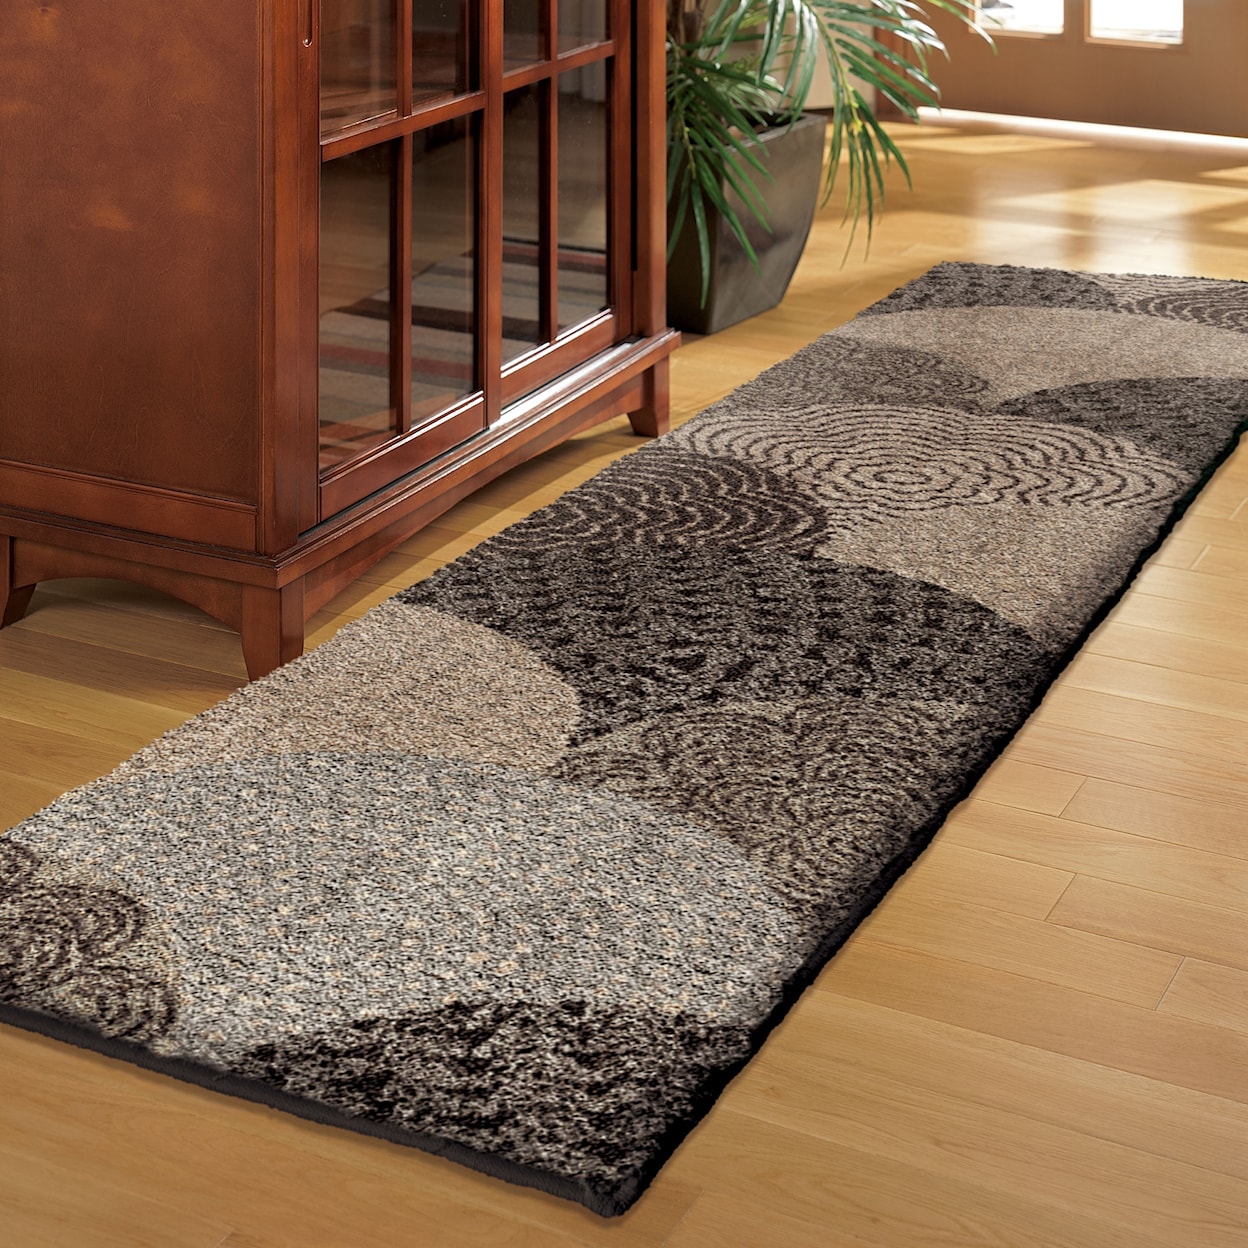 Orian Rugs Wild Weave Oystershell Seal Black 2'3" x 8' Rug